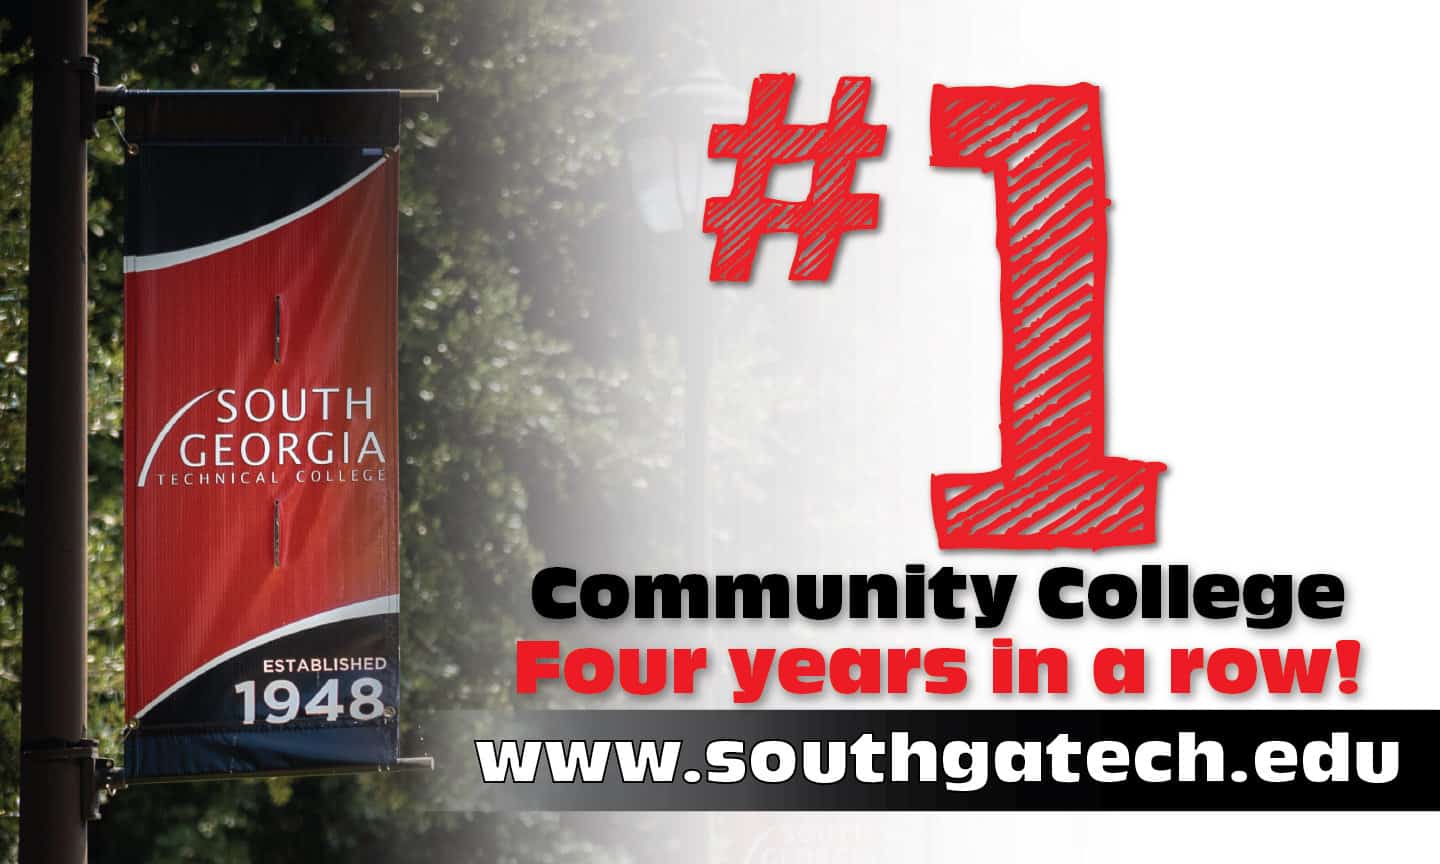 South Georgia Technical College is recognized for the 4th consecutive year as being named the best two-year college in Georgia.